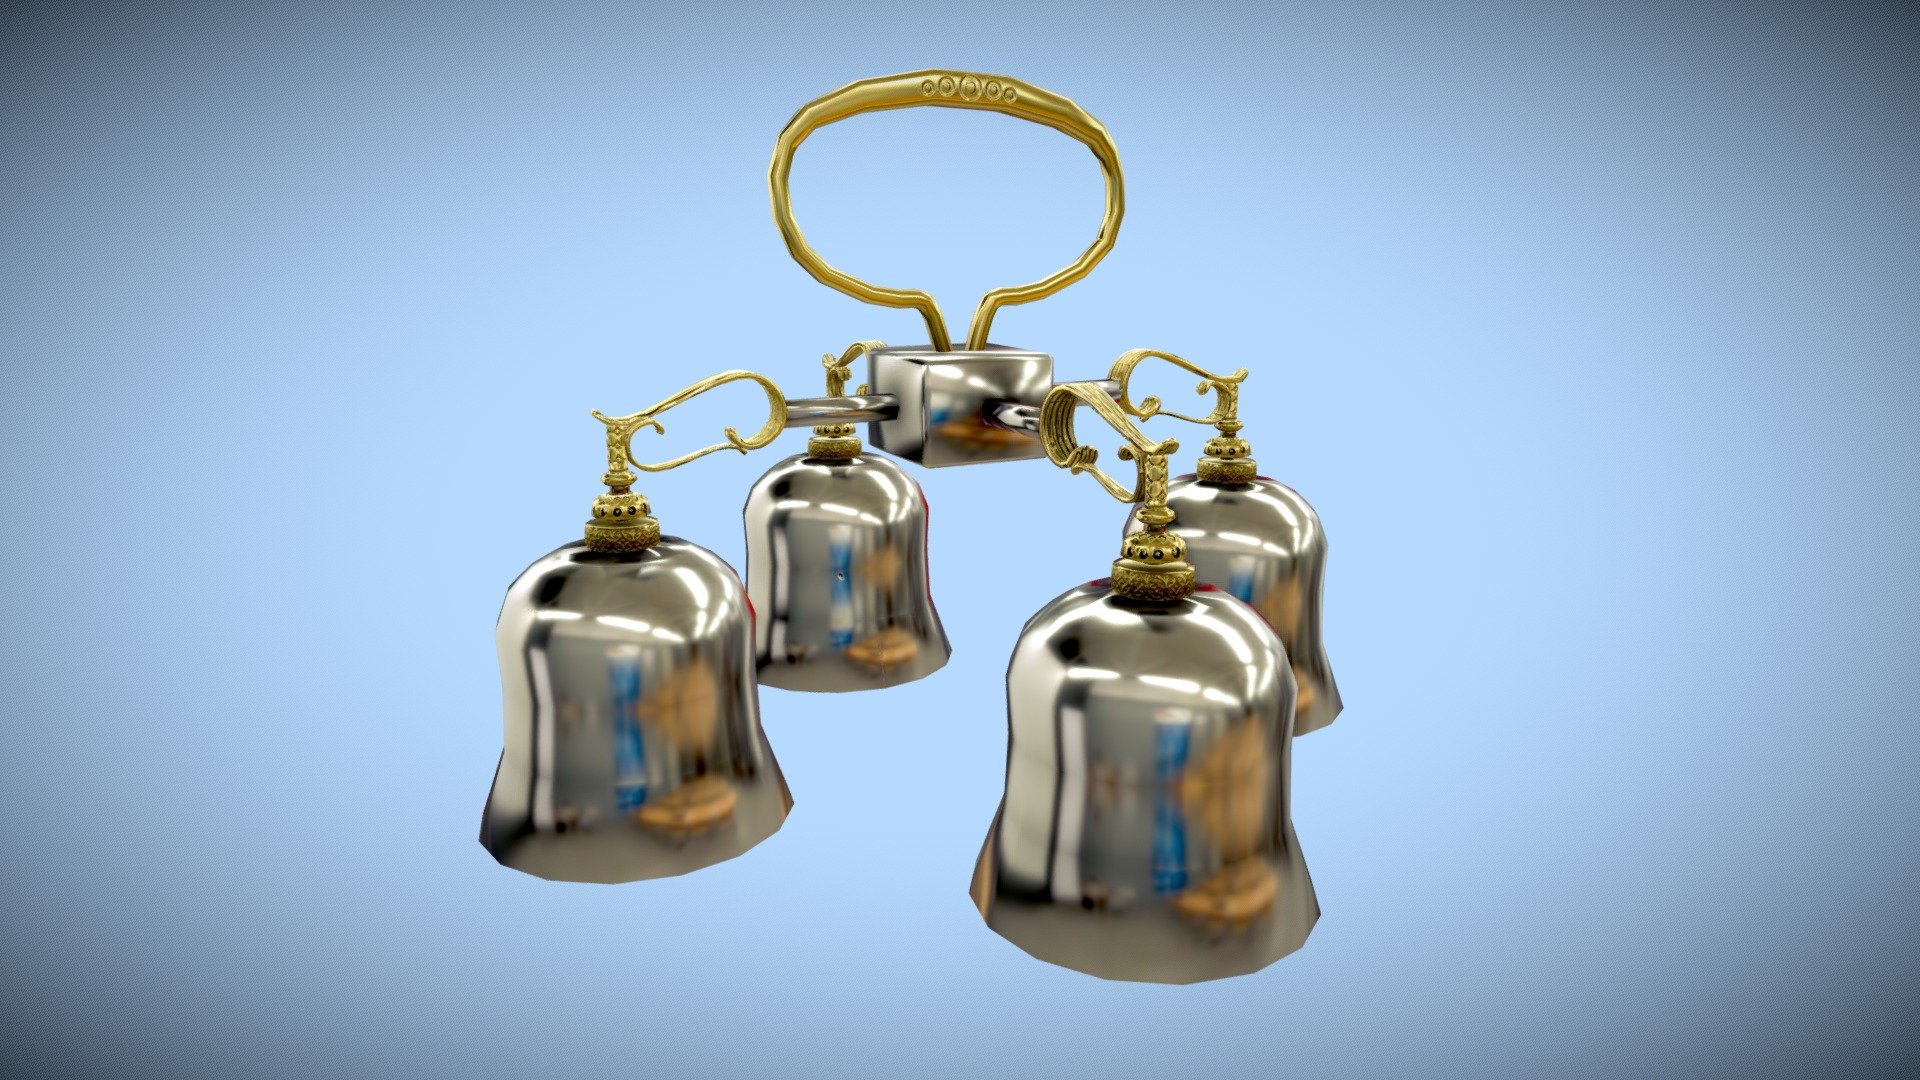 Altar bells or Sanctus Bells modeled in blender and textured in Substance Painter.

In Christian services, they are used to accentuate the holy moment acoustically and to draw the attention of the faithful to the altar.

The Bells are joined together into one mesh for better use in kitbashing, games etc, but you can seperate them in Edit Mode e.g. in Blender.

Most of the details are made by normal maps, so that I tried to keep the base mesh lowpoly. I think it could have even less polygons but I like the level of detail the model has right now 3d model